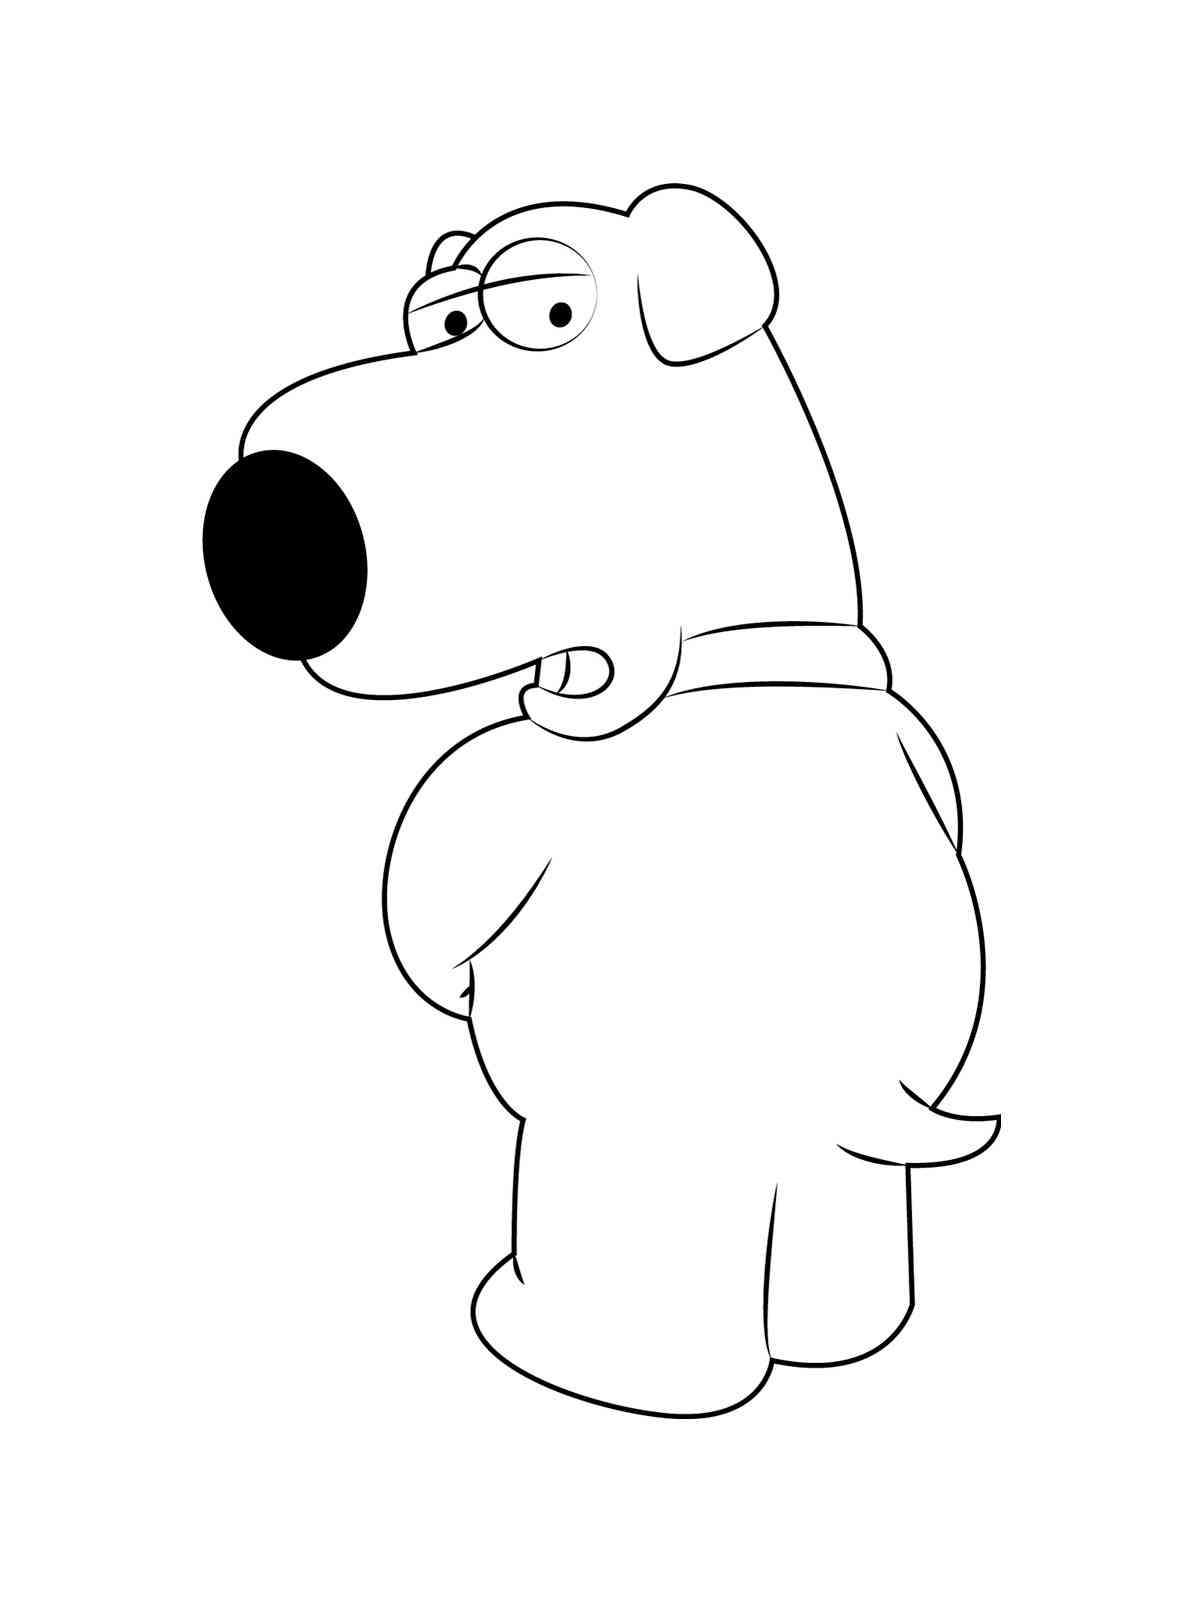 Family Guy 6 coloring page